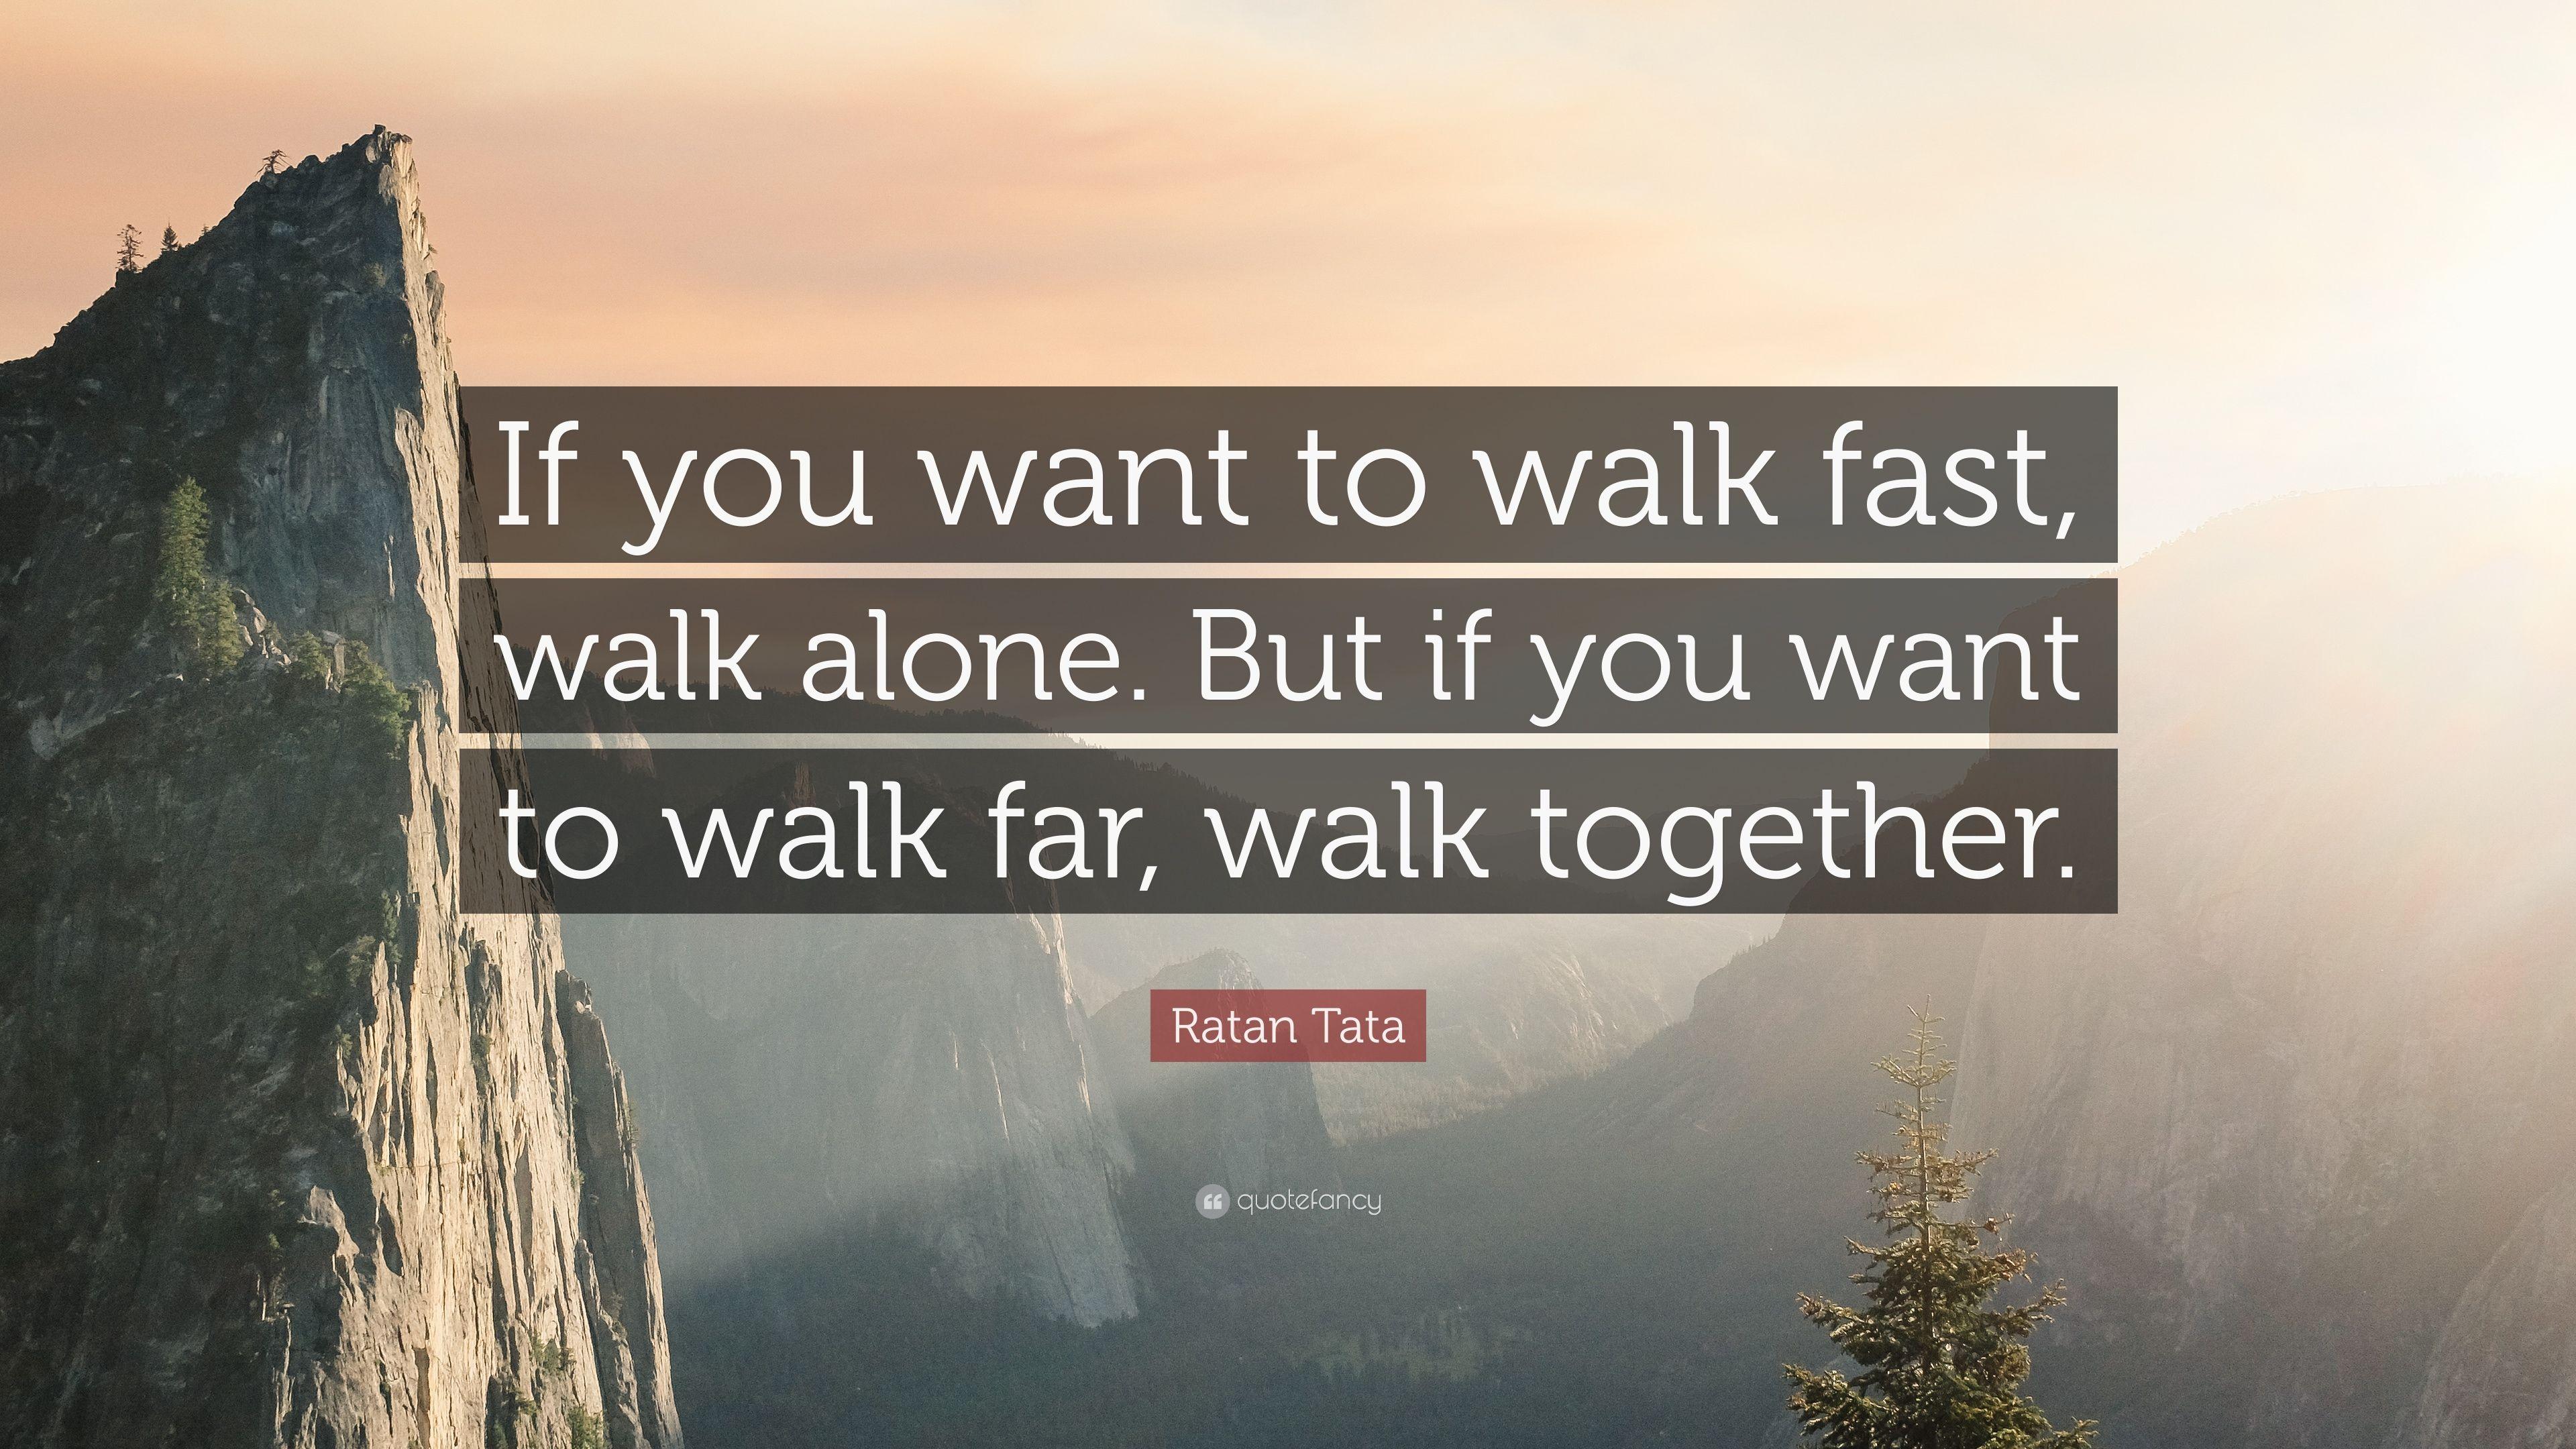 Ratan Tata Quote: “If you want to walk fast, walk alone. But if